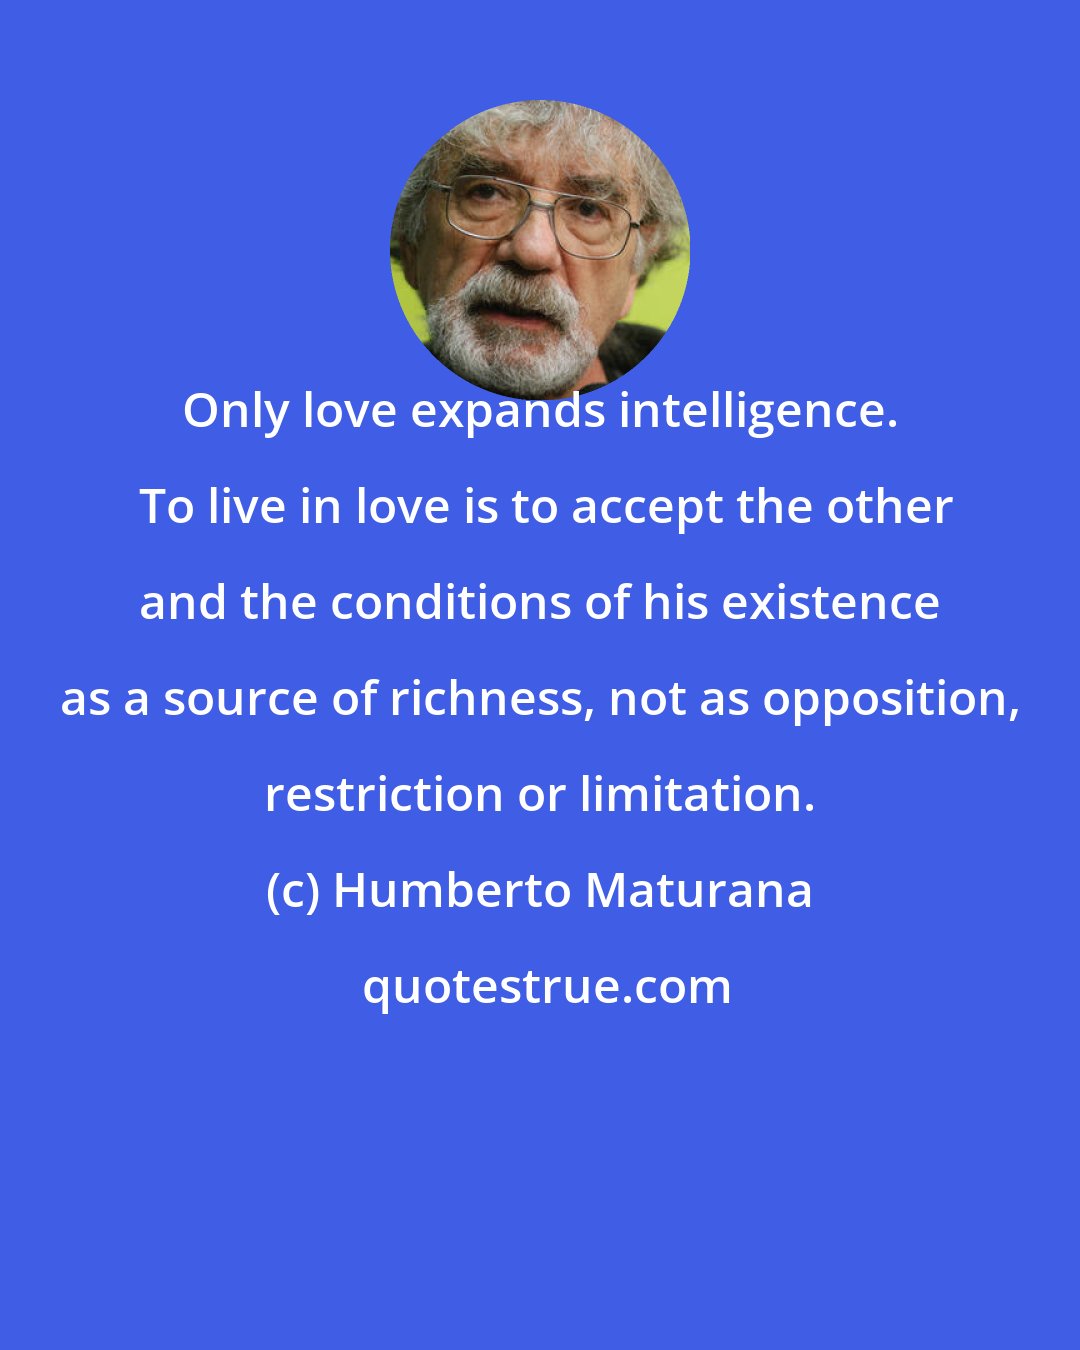 Humberto Maturana: Only love expands intelligence.  To live in love is to accept the other and the conditions of his existence as a source of richness, not as opposition, restriction or limitation.